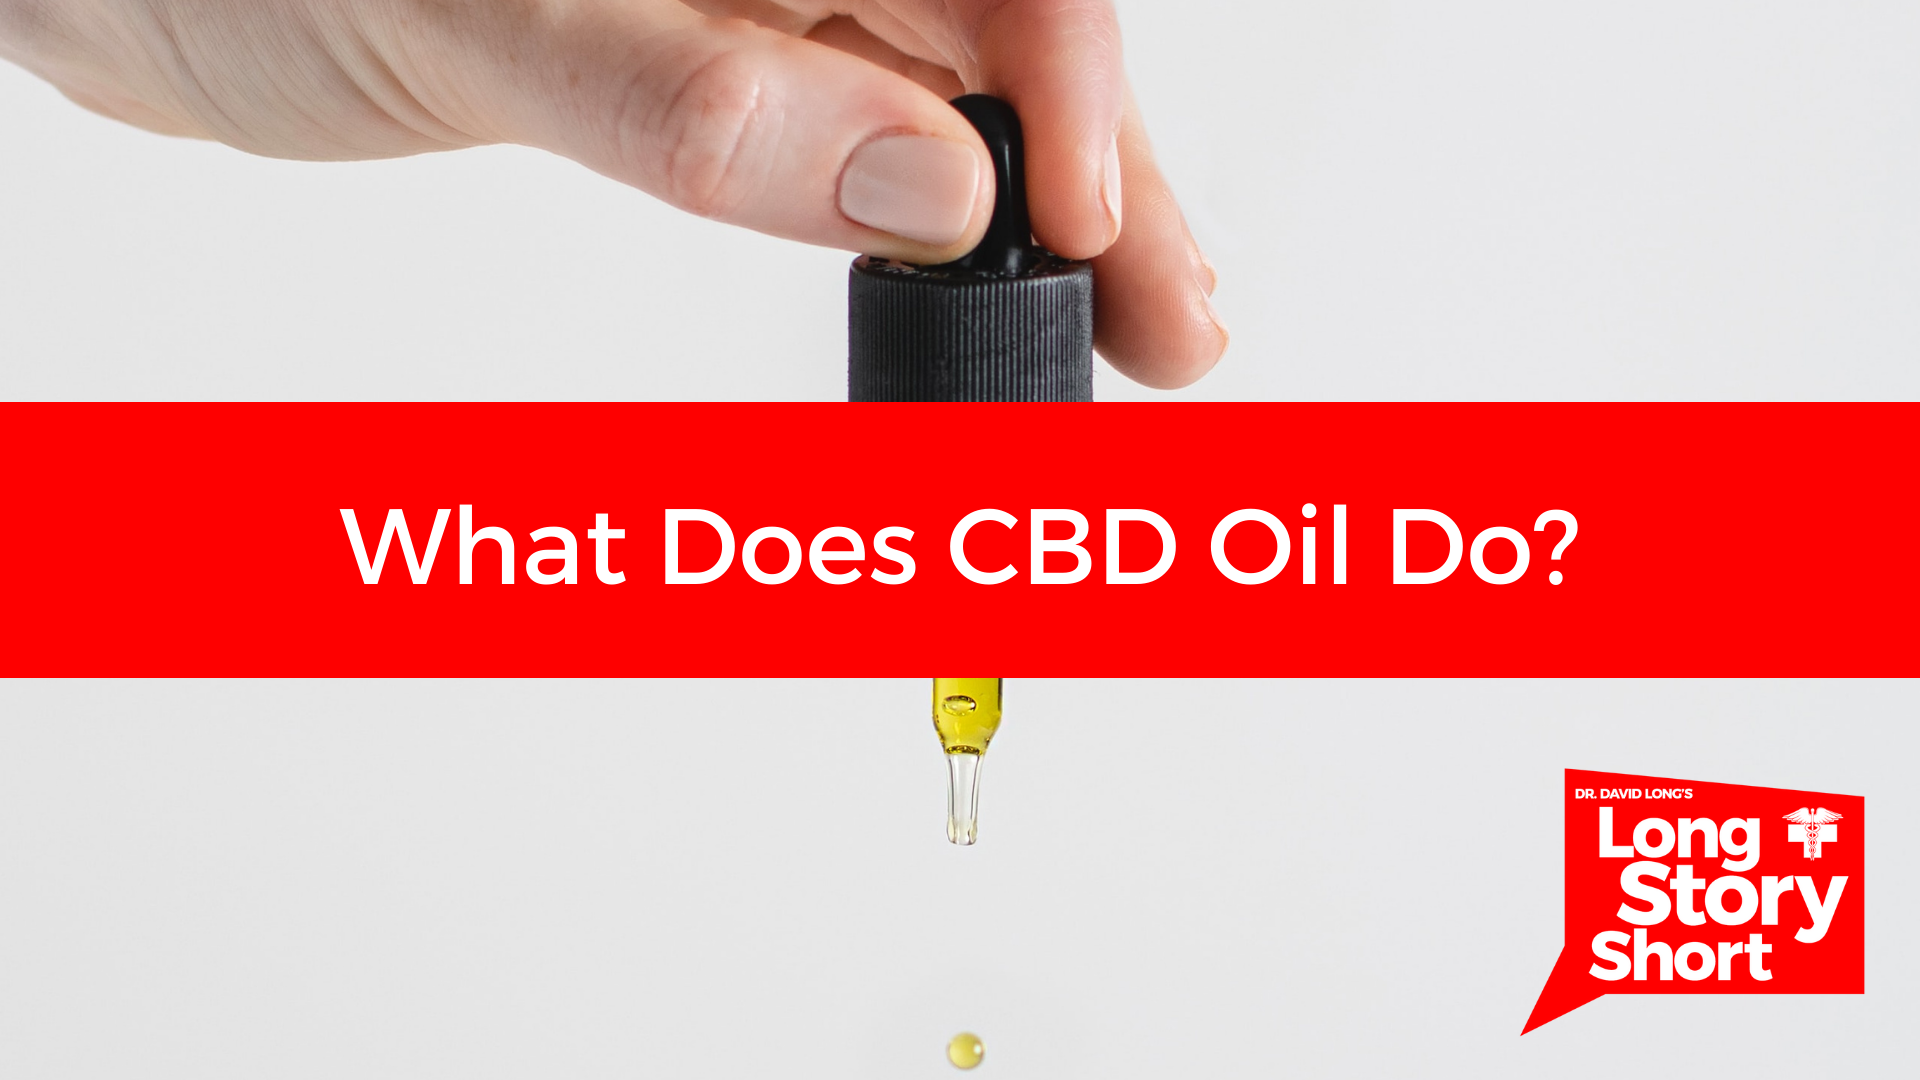 You are currently viewing What Does CBD Oil Do? – Dr. David Long